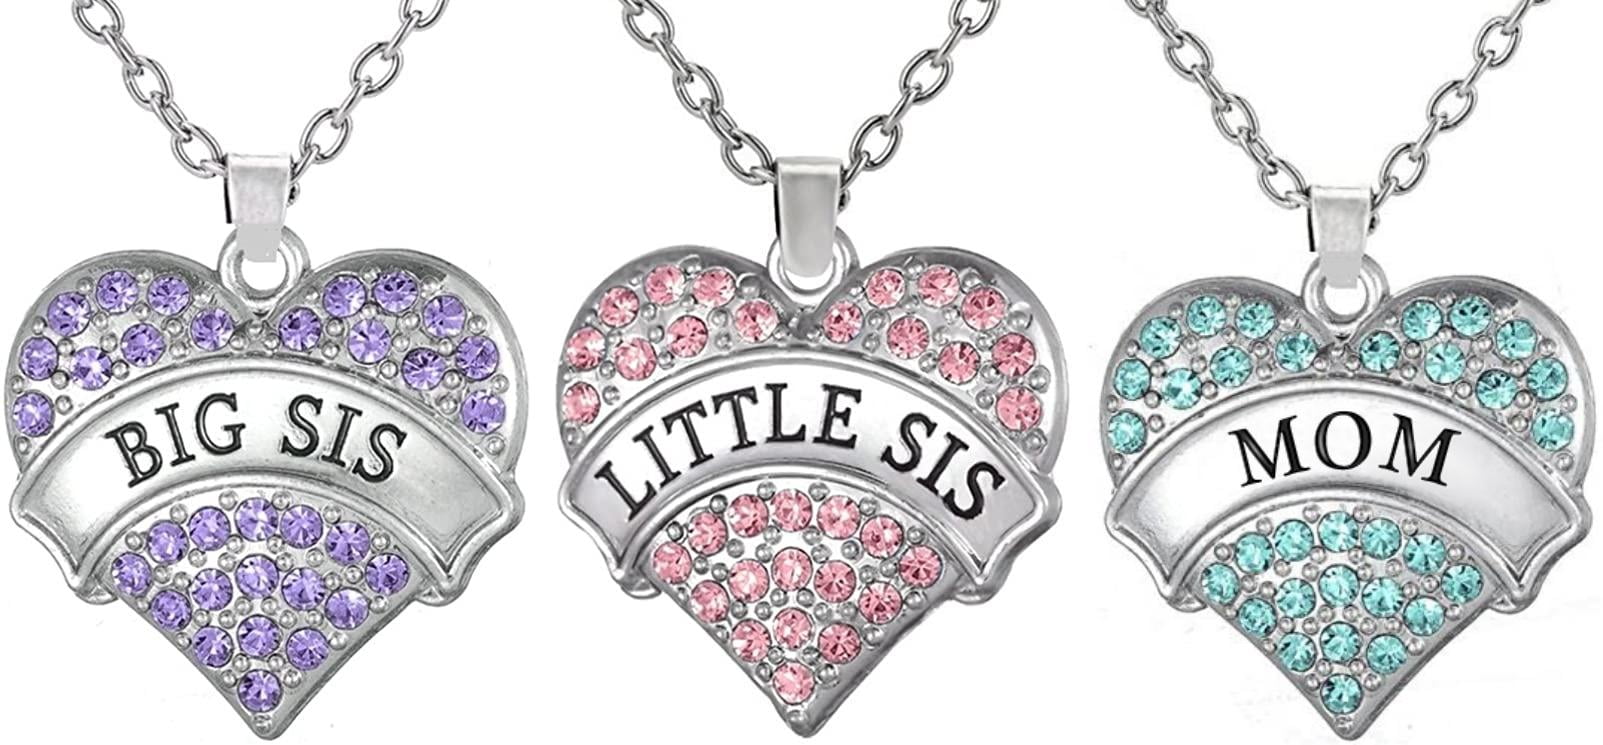 2PCs Broken Heart Big Sis Little Sis Silver Necklace Set Sisters Family Gift 